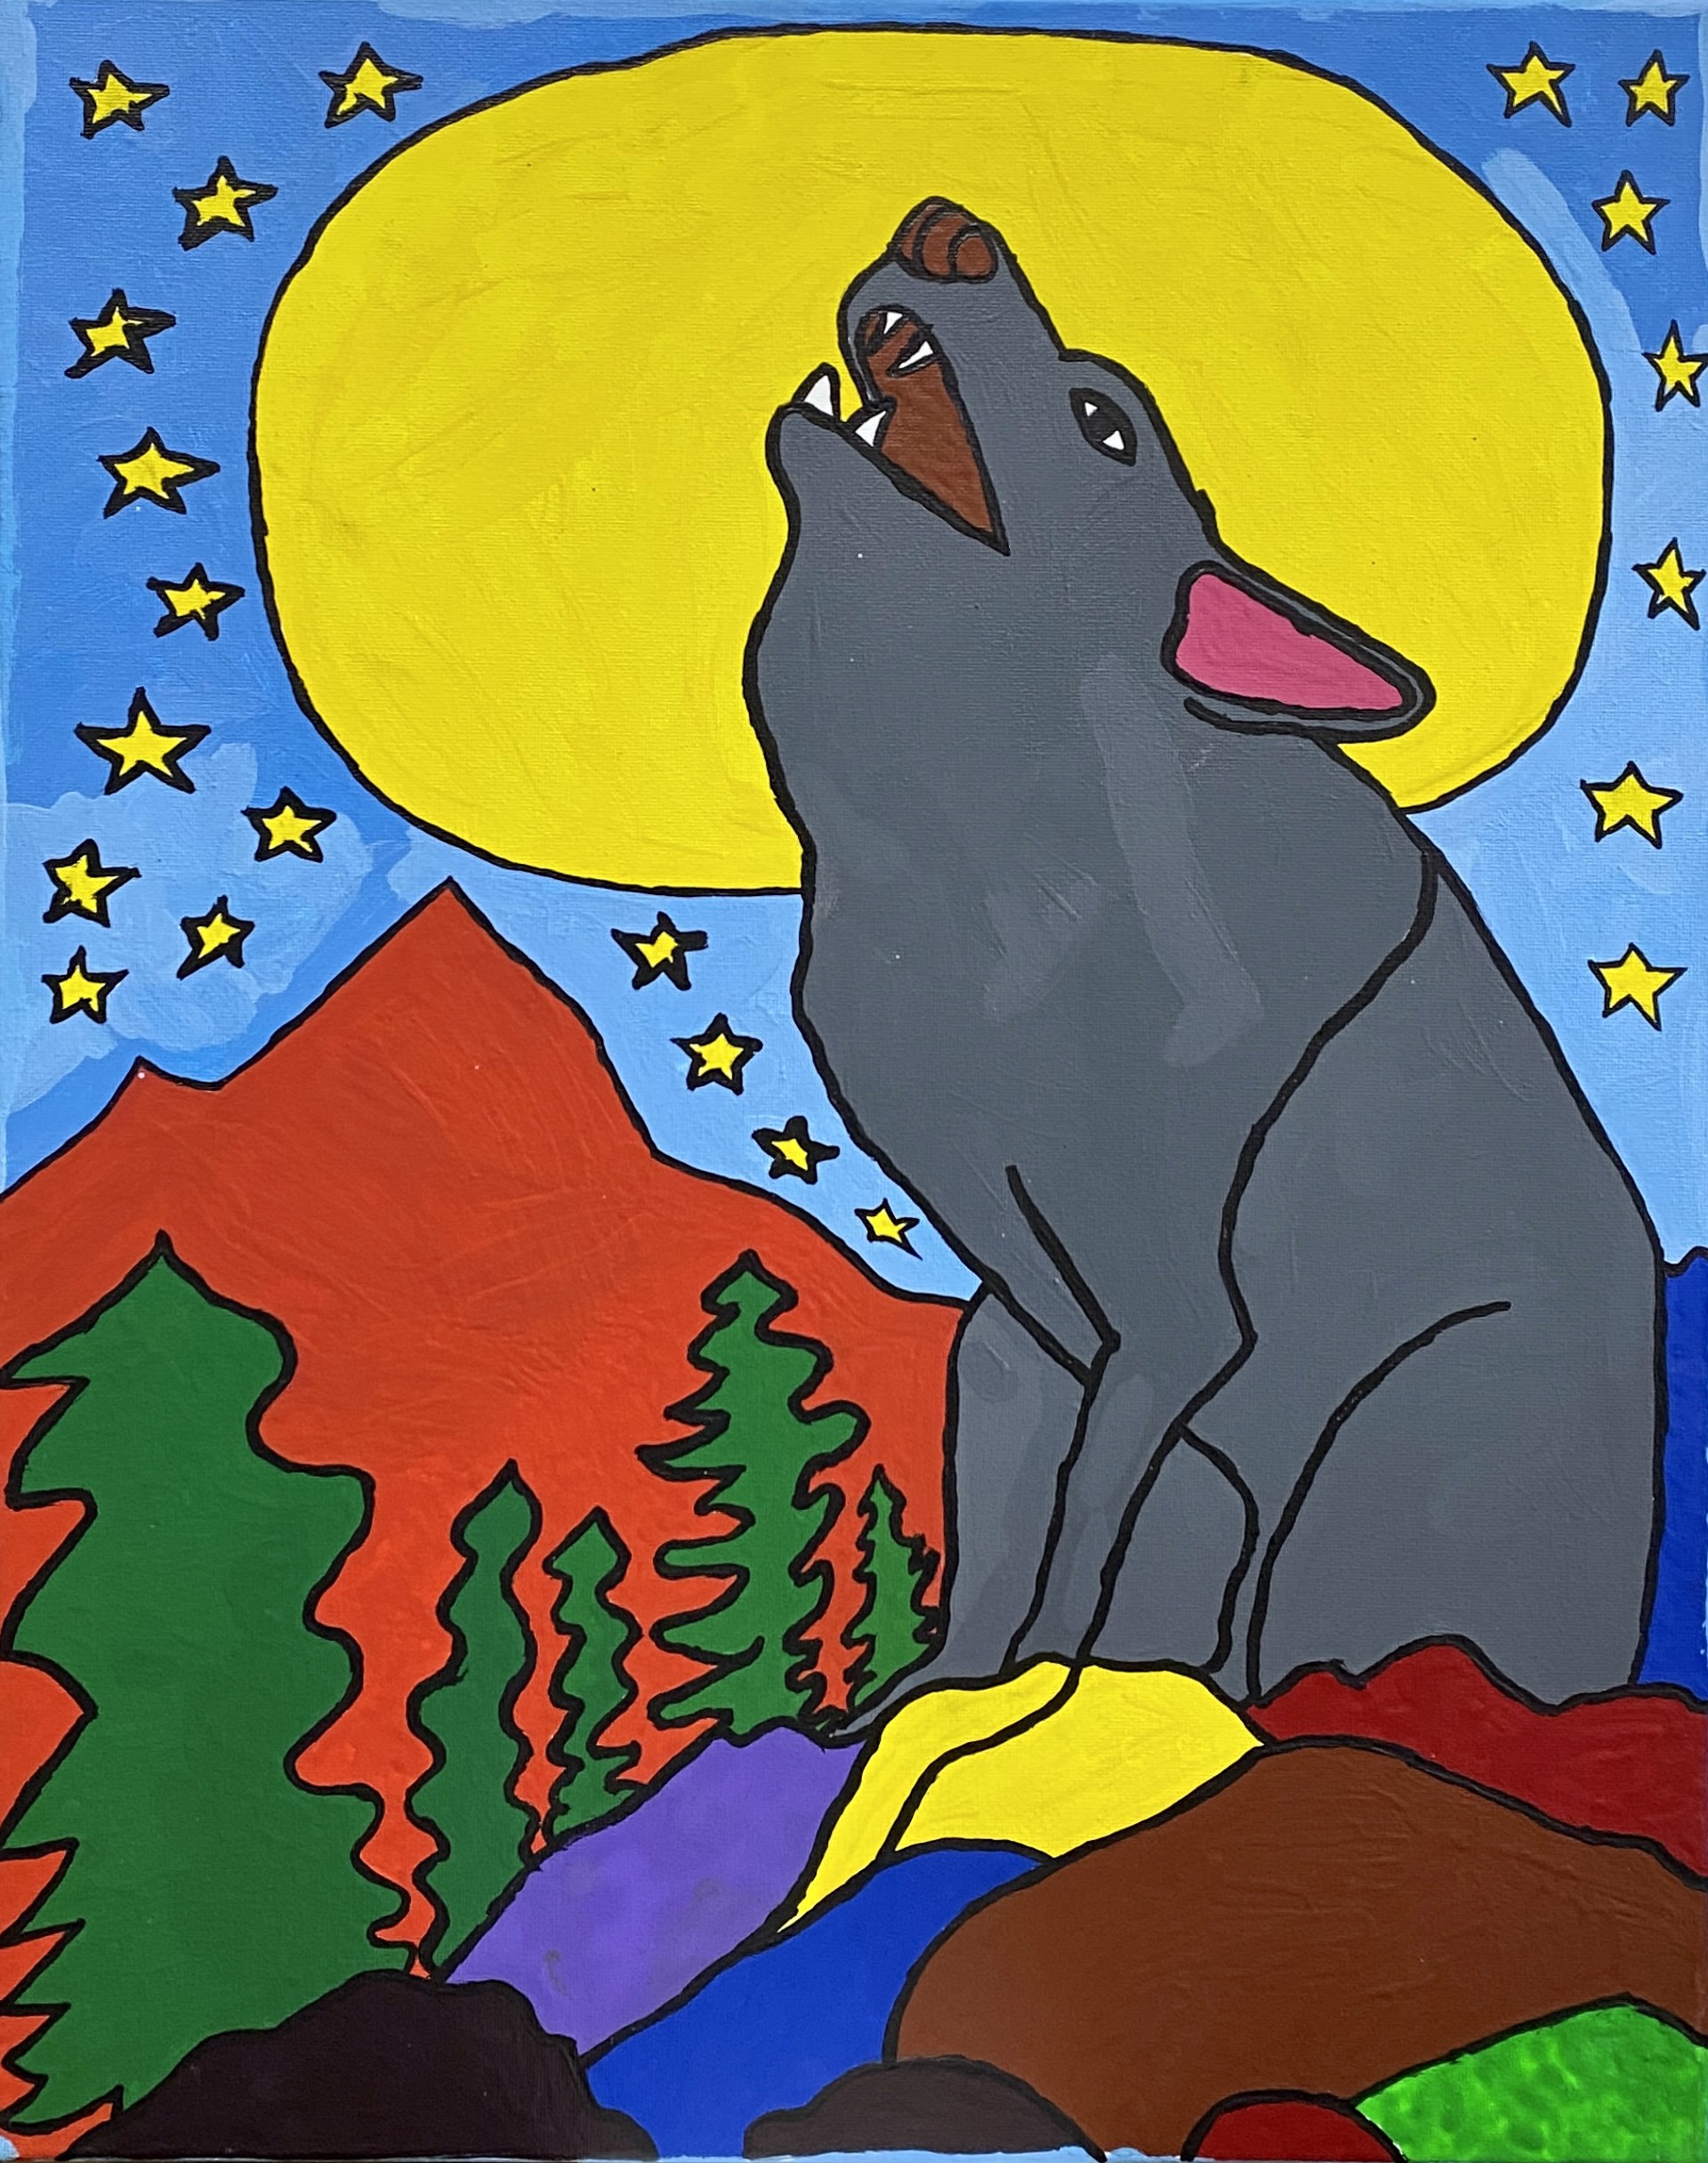 "Bark At The Moon" by Malcolm (One Step Beyond) by Art One Foundation